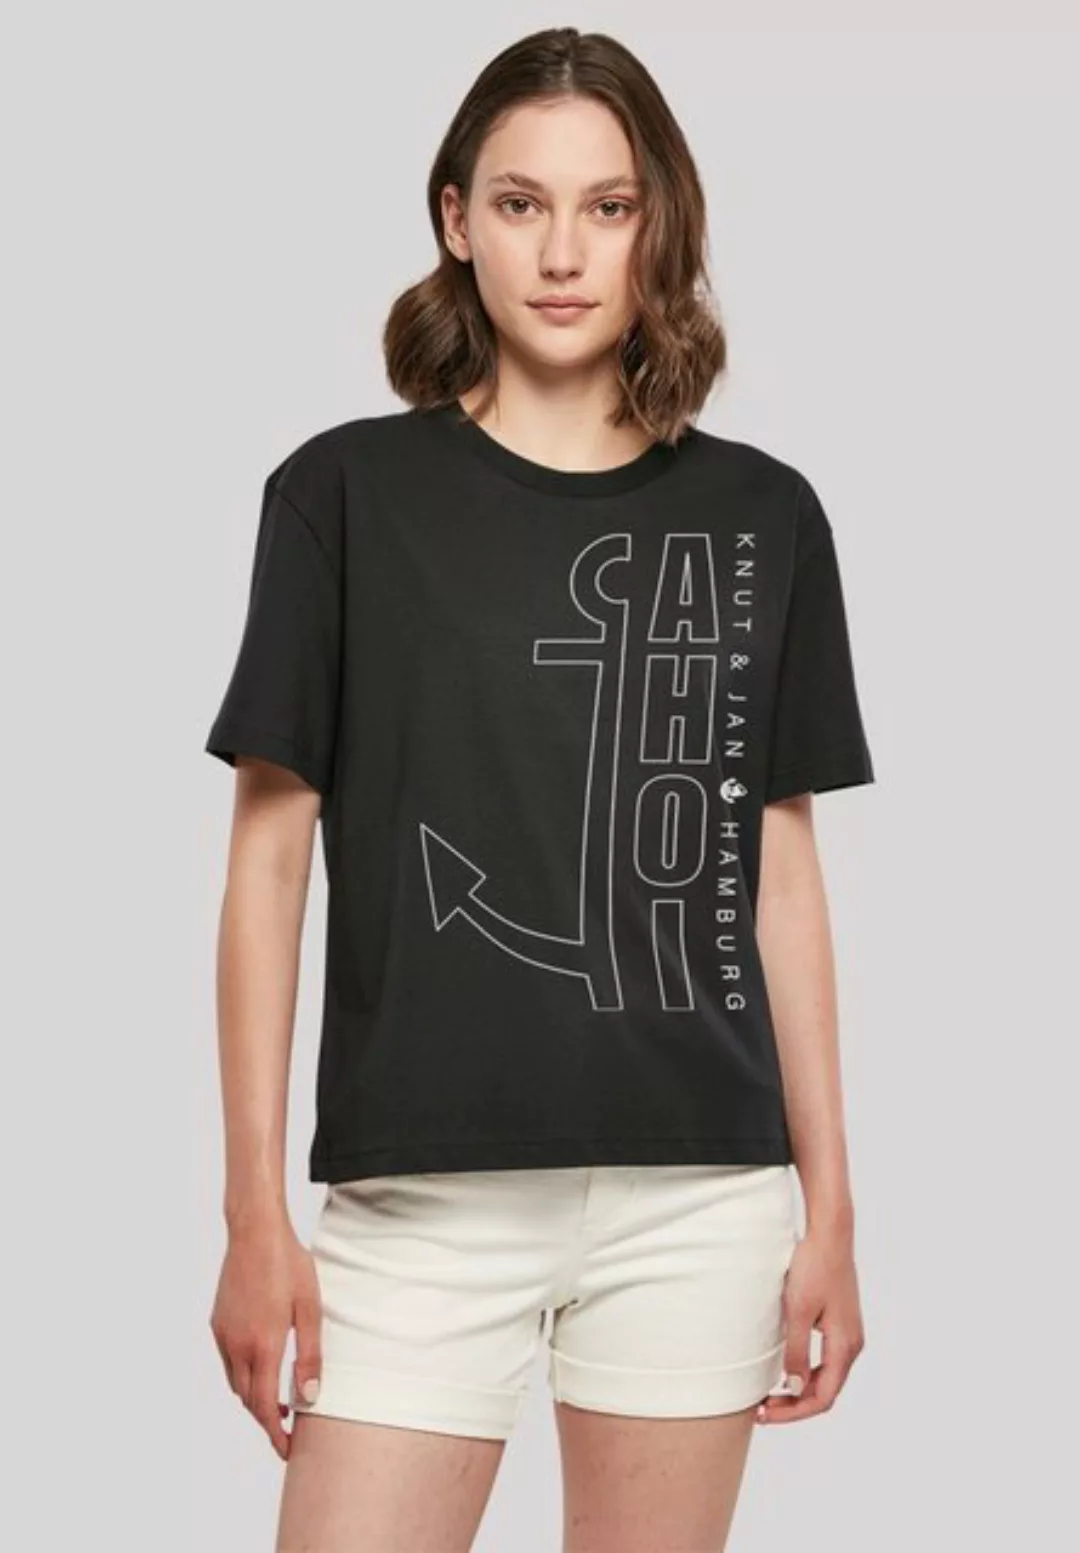 F4NT4STIC T-Shirt "Ahoi Anker Outlines with Ladies Everyday Tee" günstig online kaufen